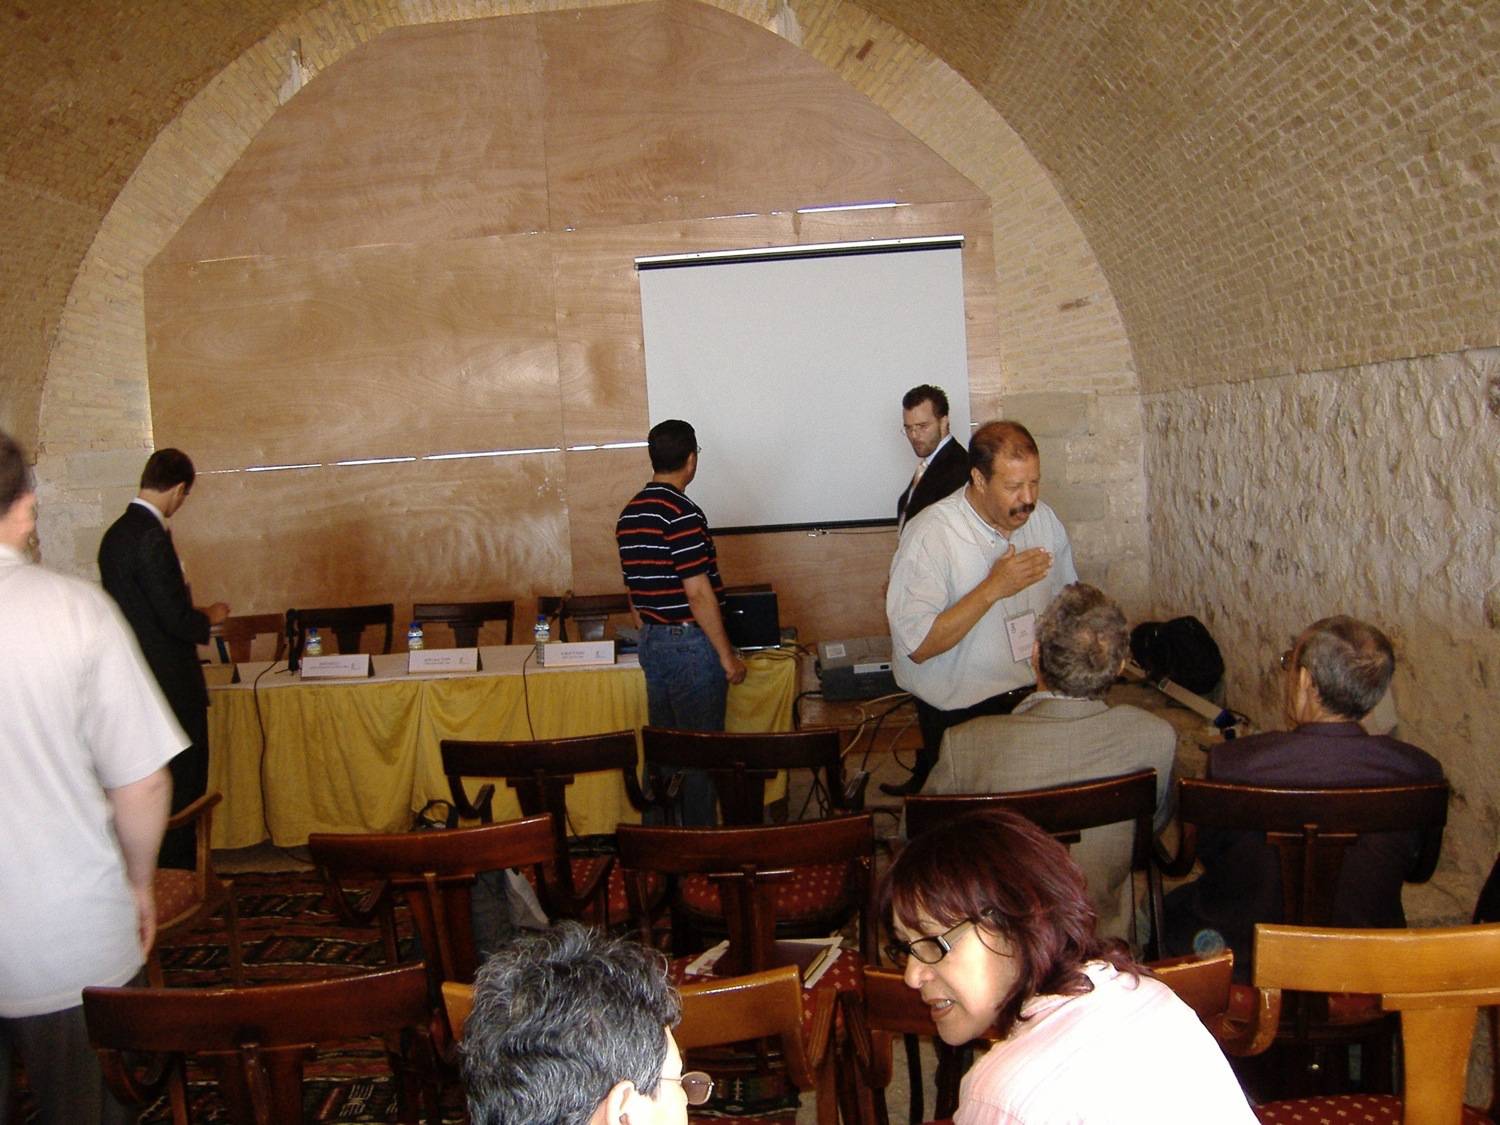 Interior view, during a conference break